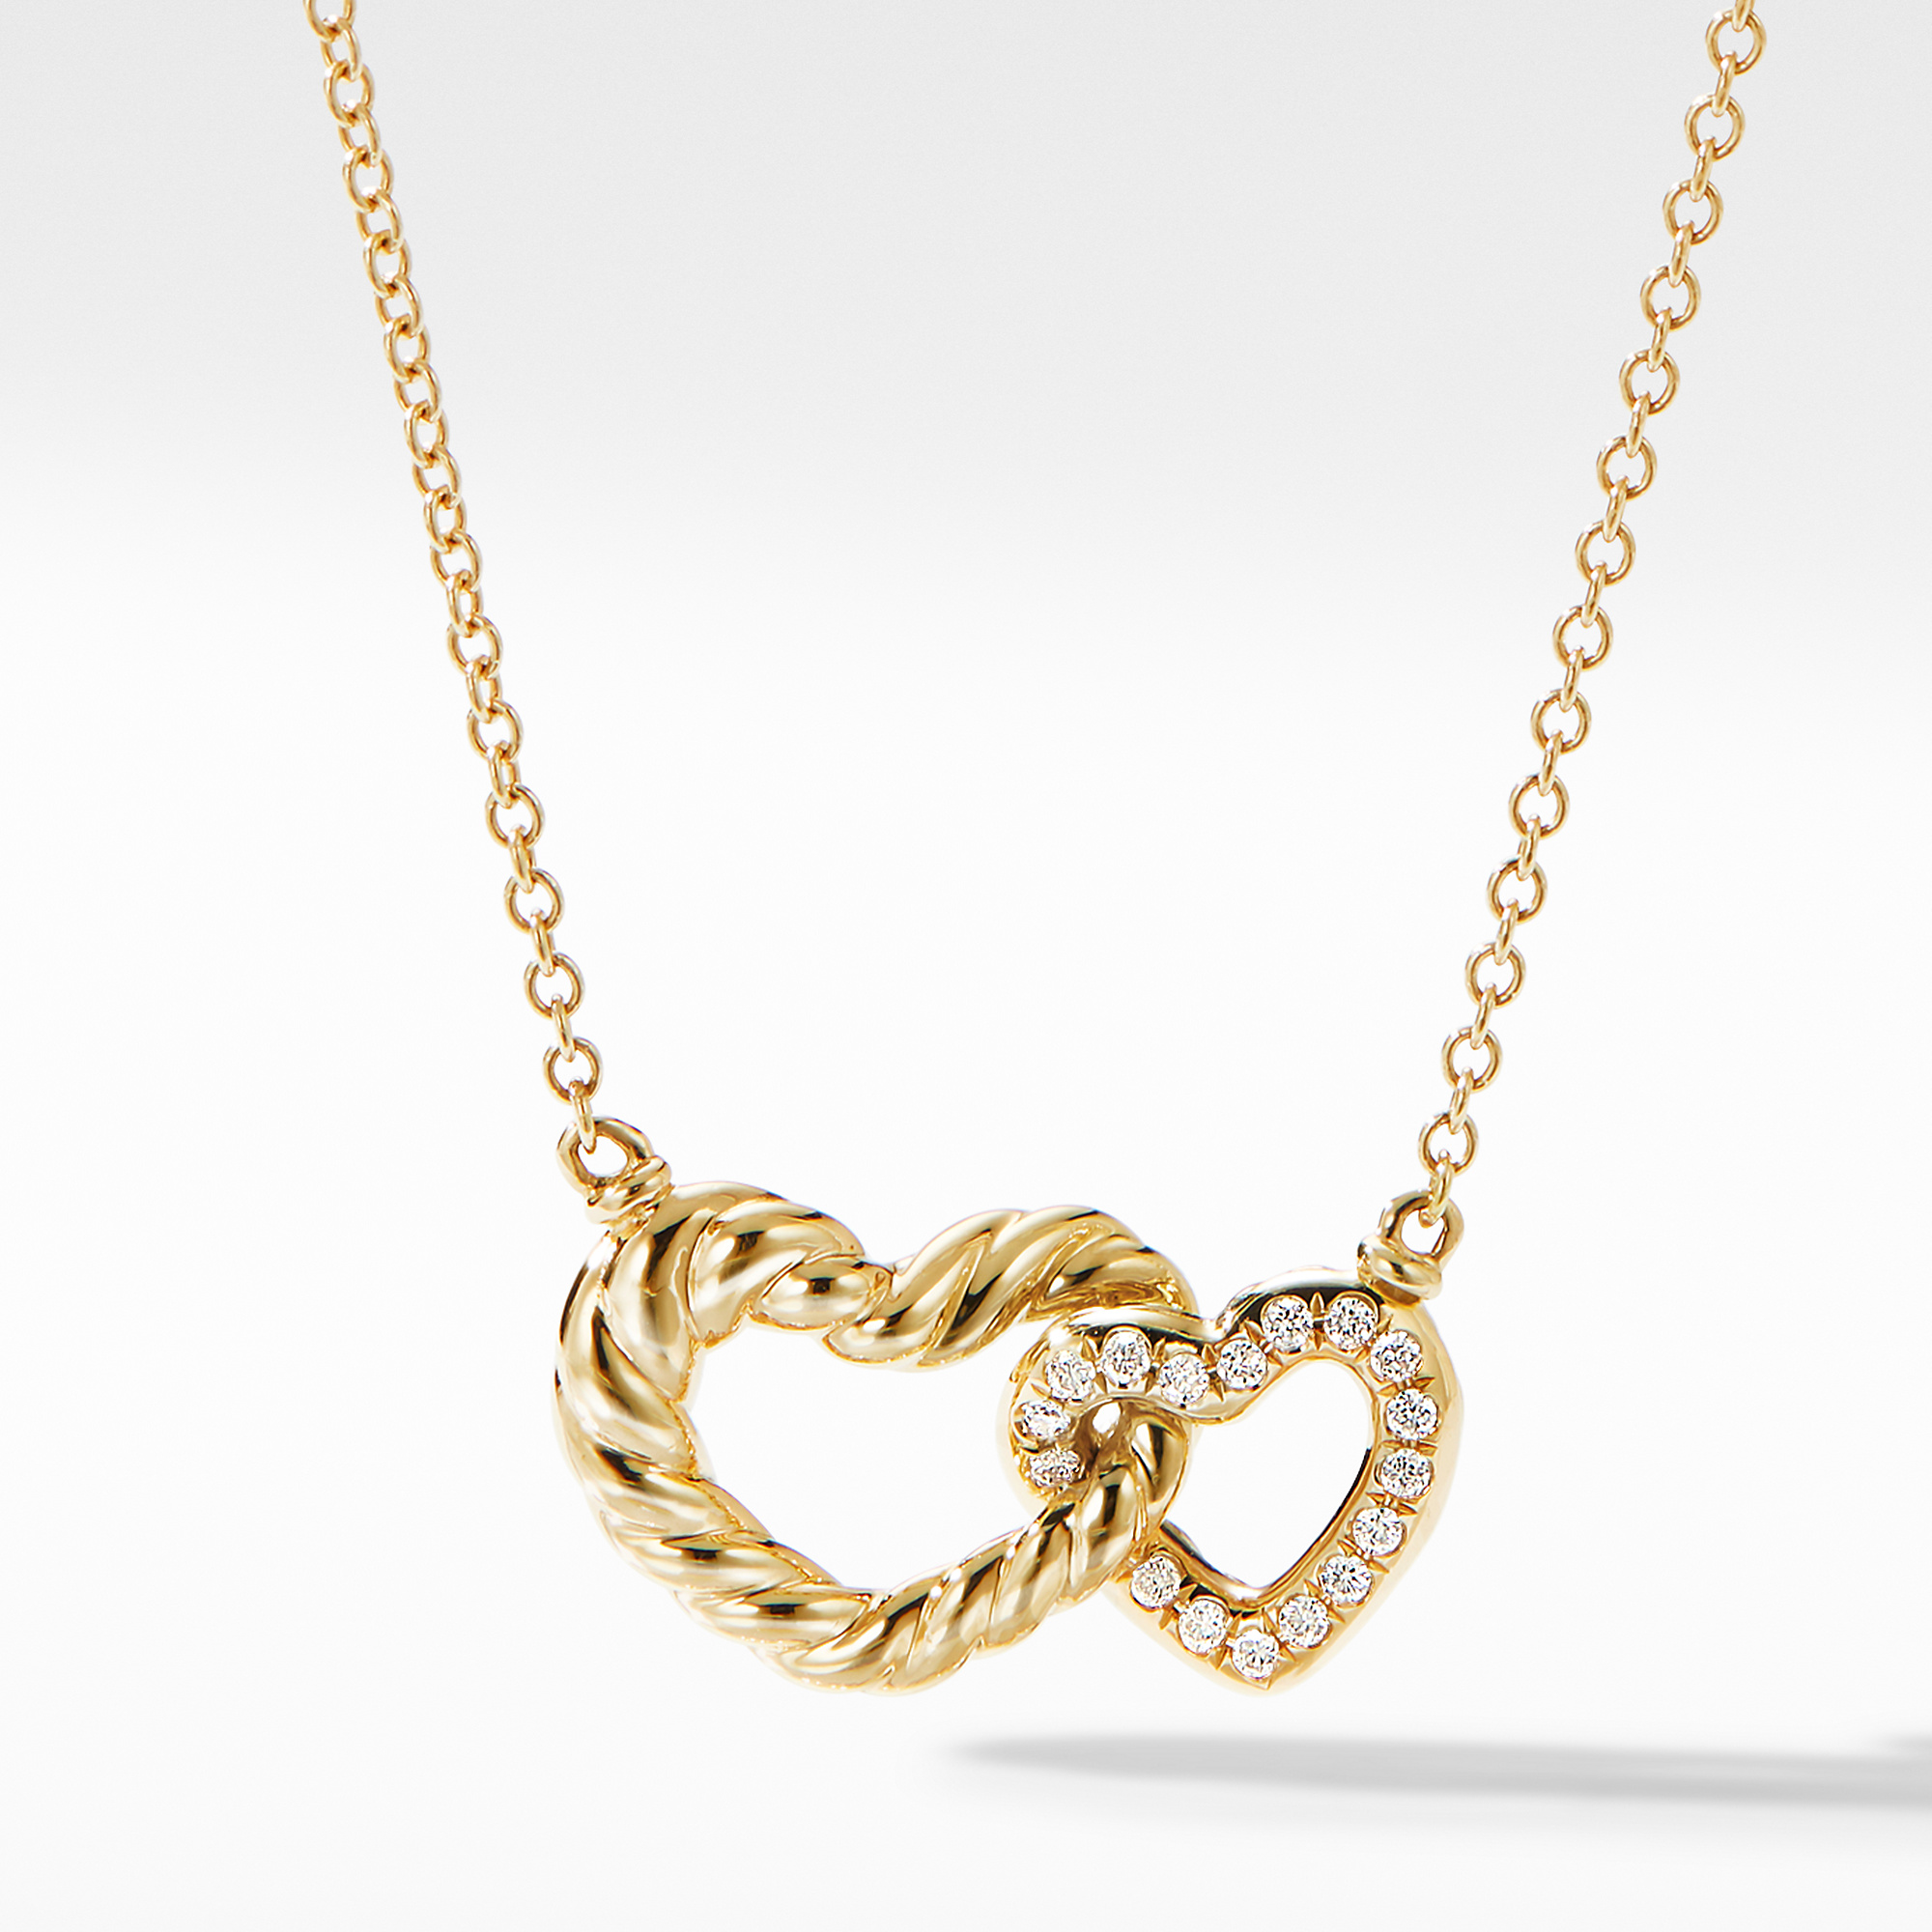 Double Heart Pendant Necklace in 18K Yellow Gold with Diamonds